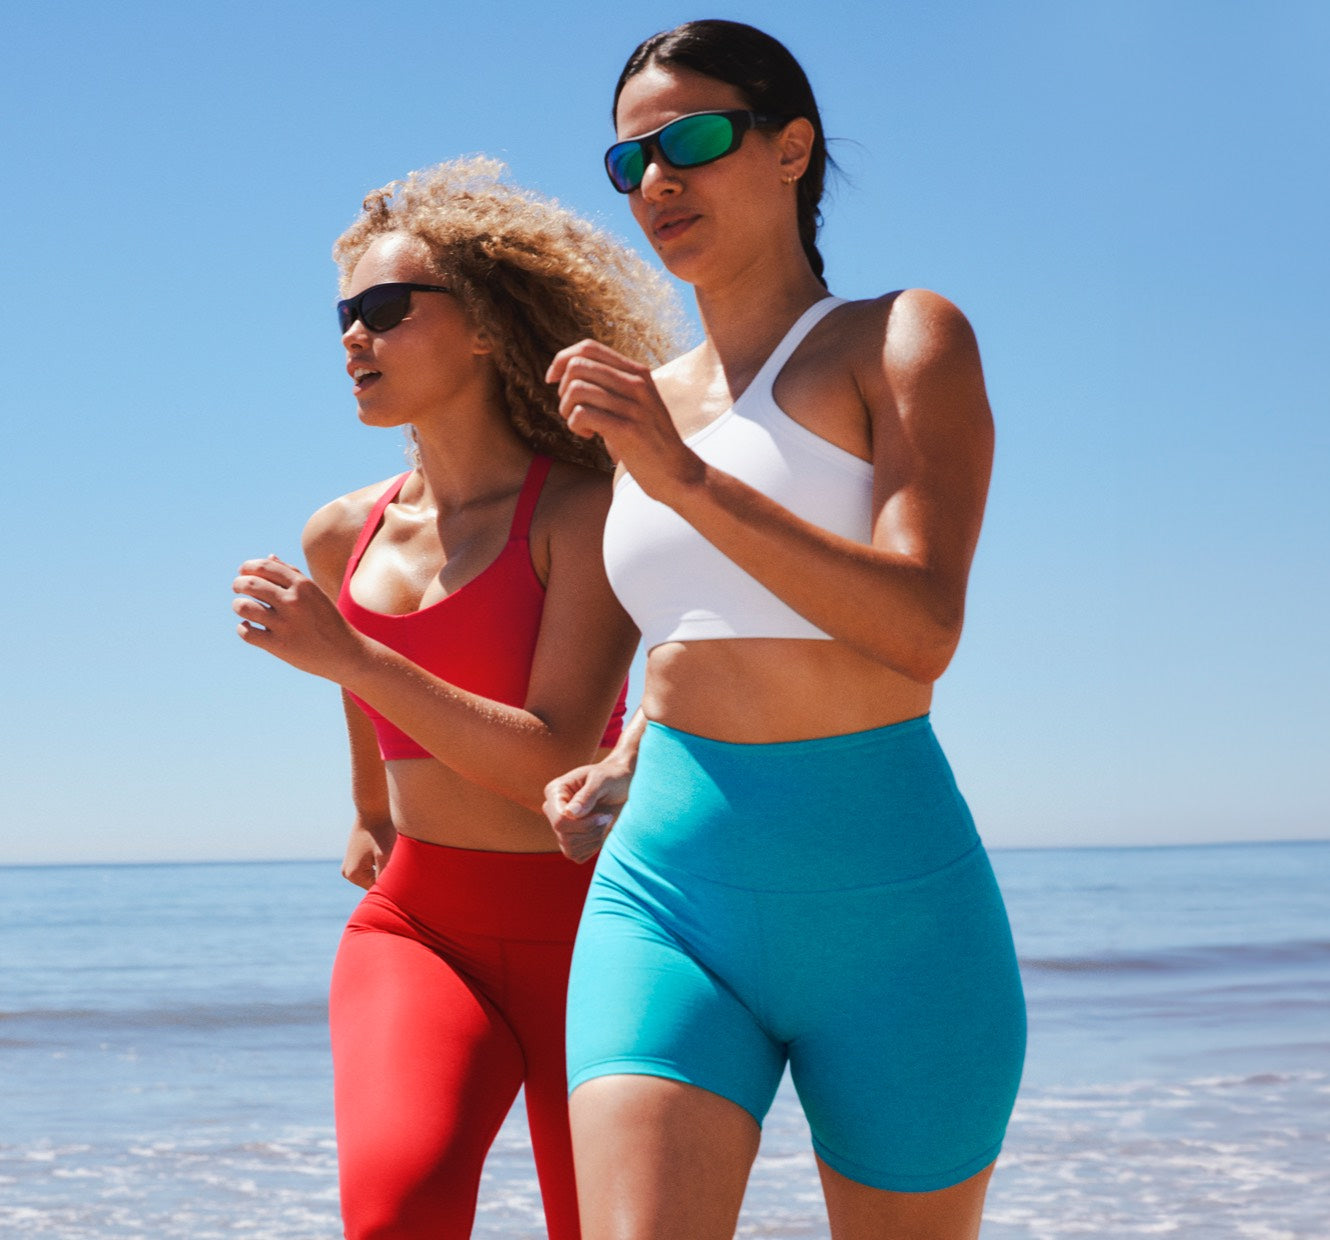 model is wearing a red racerback bra and red high-waisted midi leggings. model on the right is wearing a white one-shoulder bra top and blue high-waisted biker shorts. 